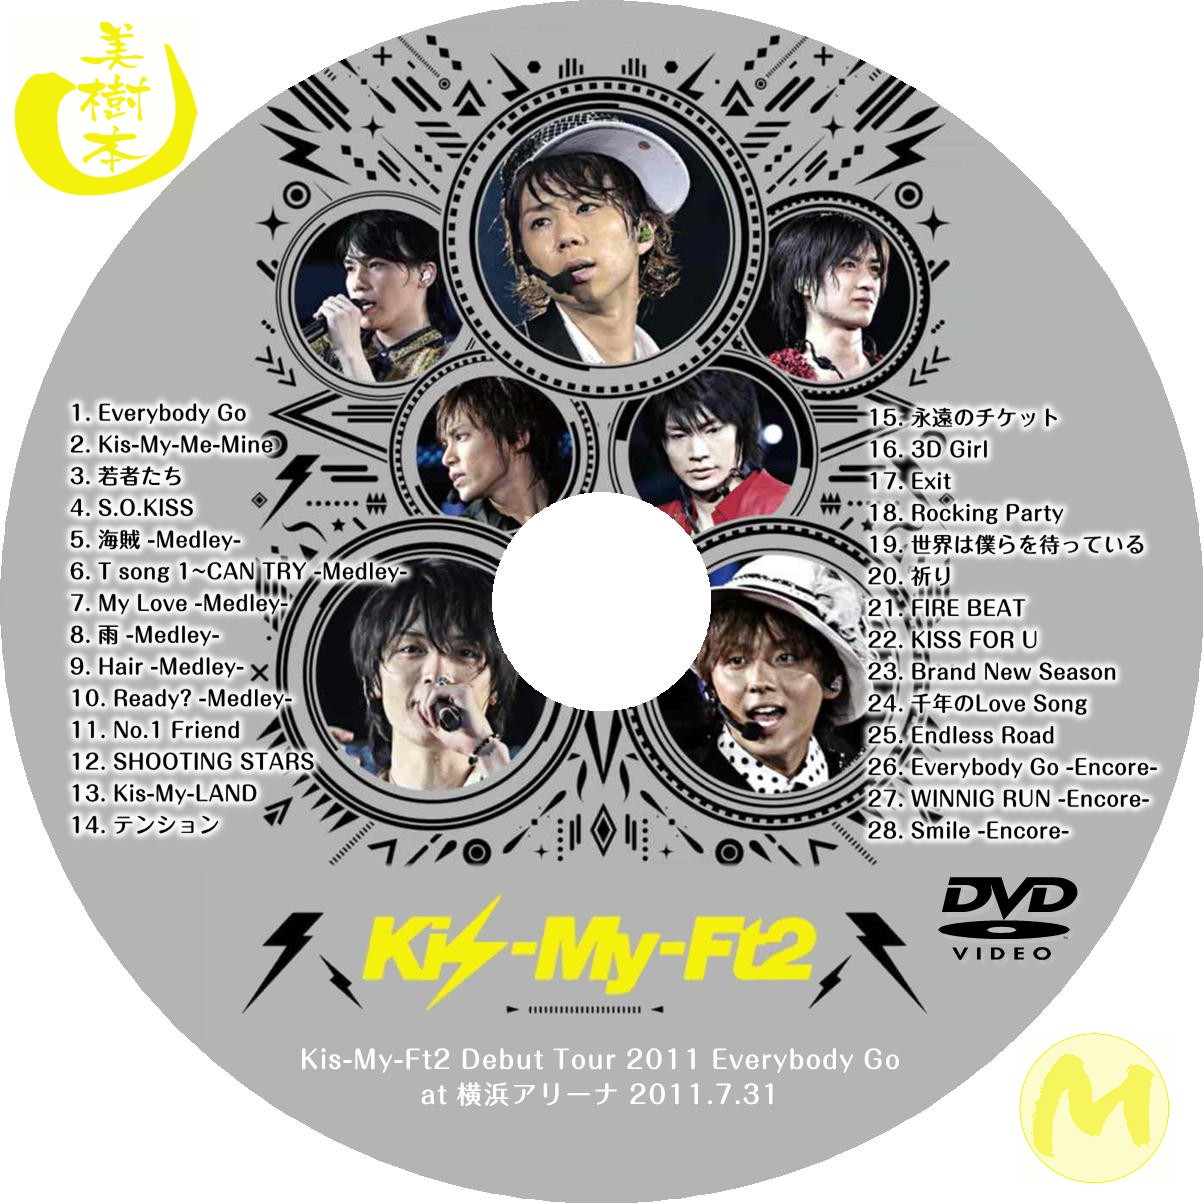 Kis-My-Ft2 Debut Tour 2011 Everybody Go at 横浜アリーナ 2011.7.31 - 自己れ～べる